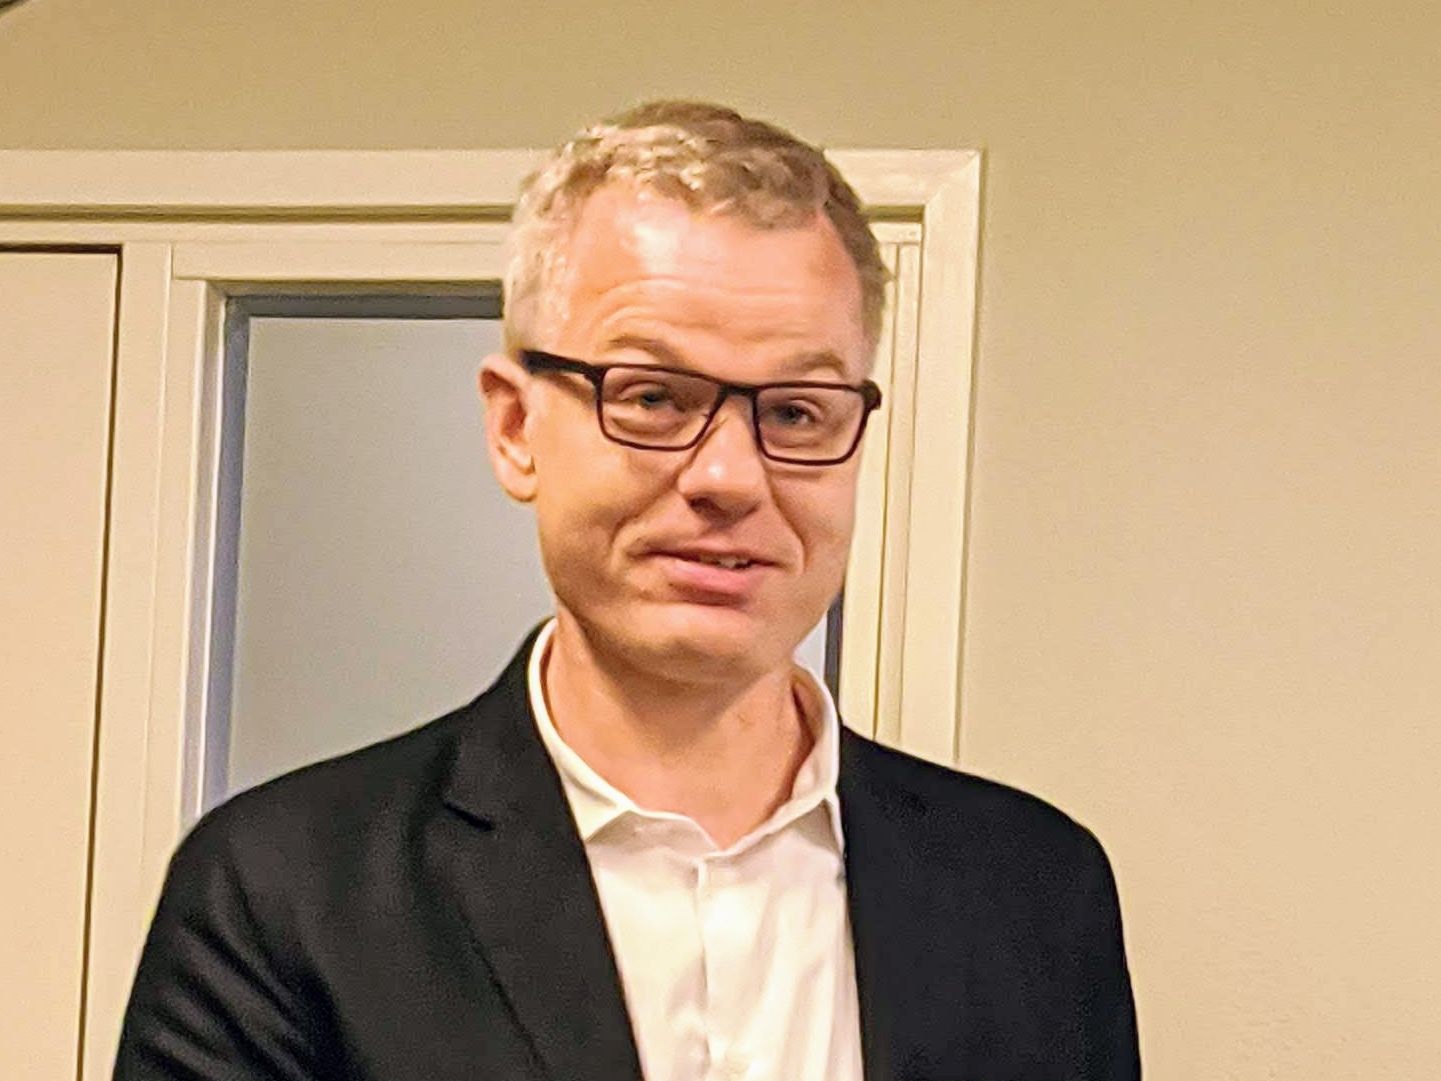 Andreas Lange is a professor of economics at the University of Hamburg and the Co-Editor-in-Chief for the Journal of Environmental Economics and Management